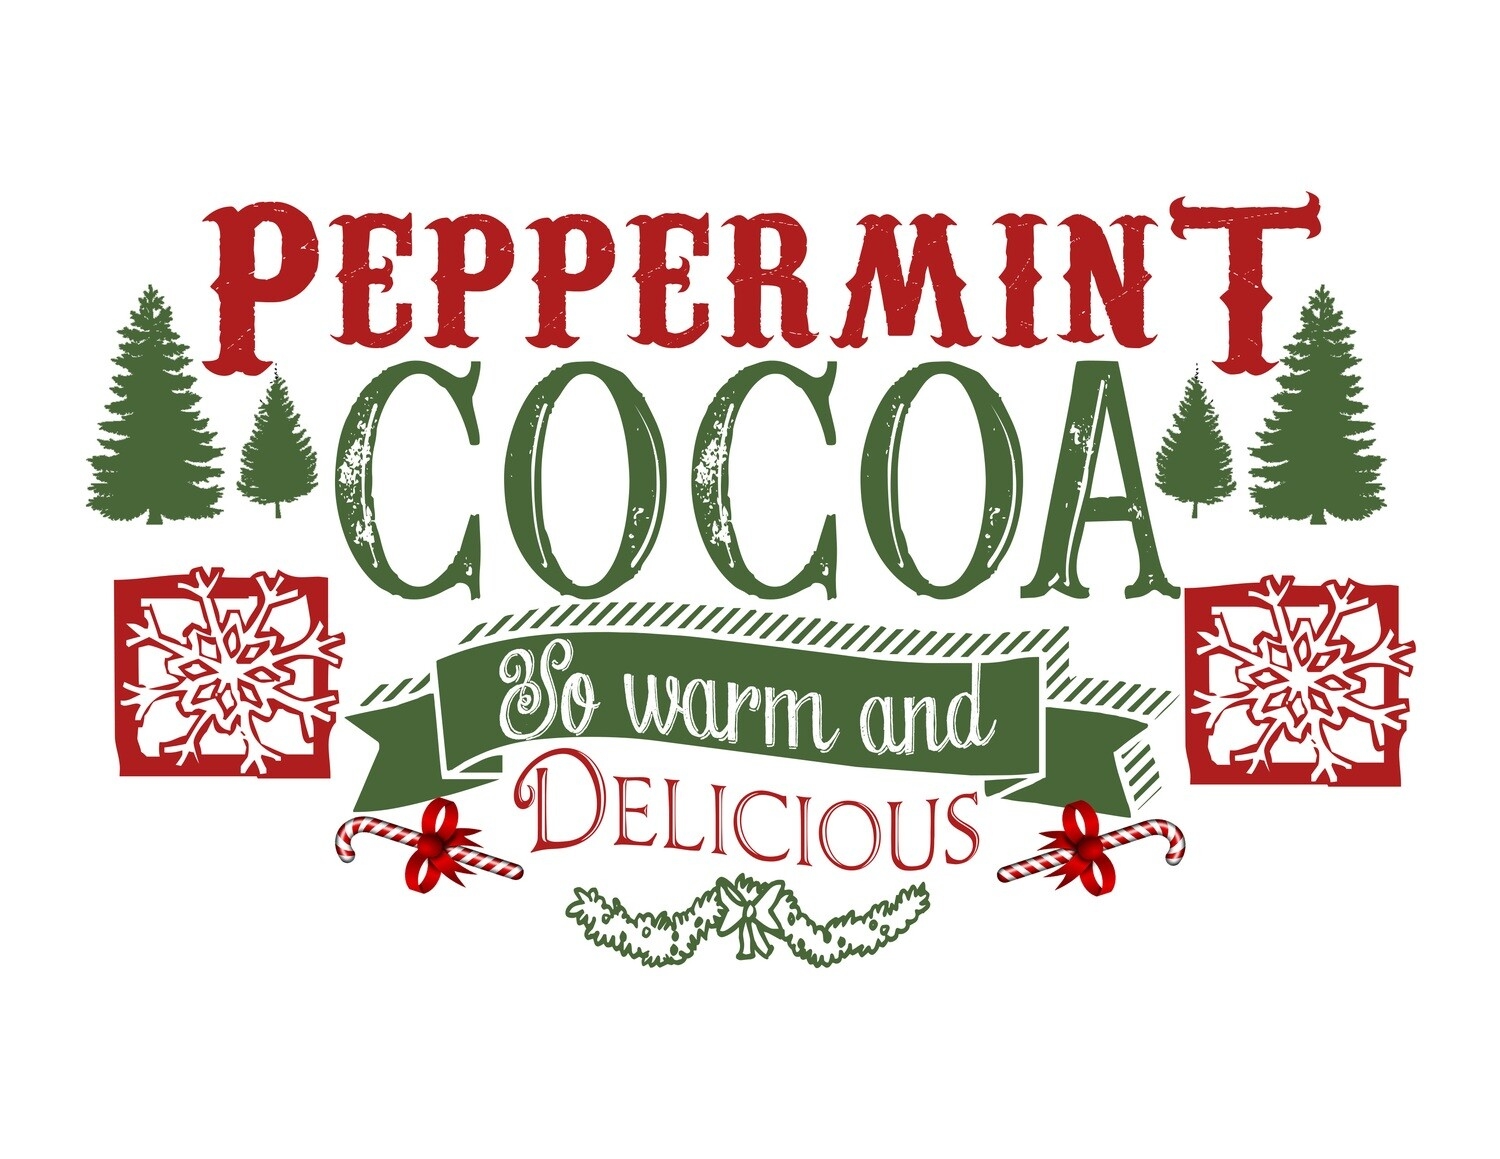 Peppermint Cocoa Free Printable Hot Chocolate Bar 24 Days Of FREE Christmas Printables Beth Bryan